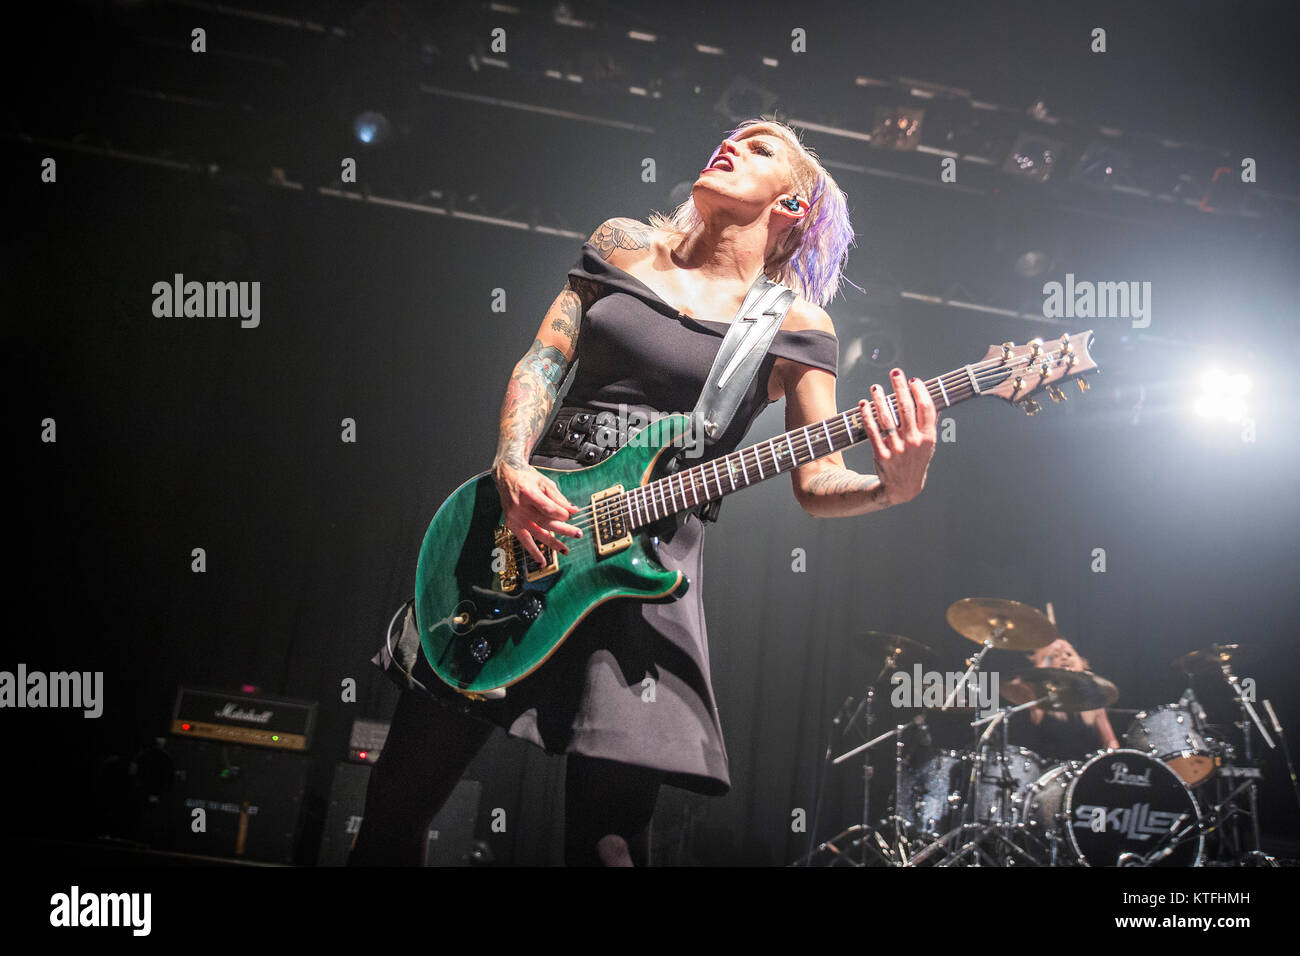 The American Christian rock band Skillet performs a live concert at Sentrum  Scene in Oslo. Here guitarist Korey Cooper is seen live on stage. Norway,  01/06 2016 Stock Photo - Alamy